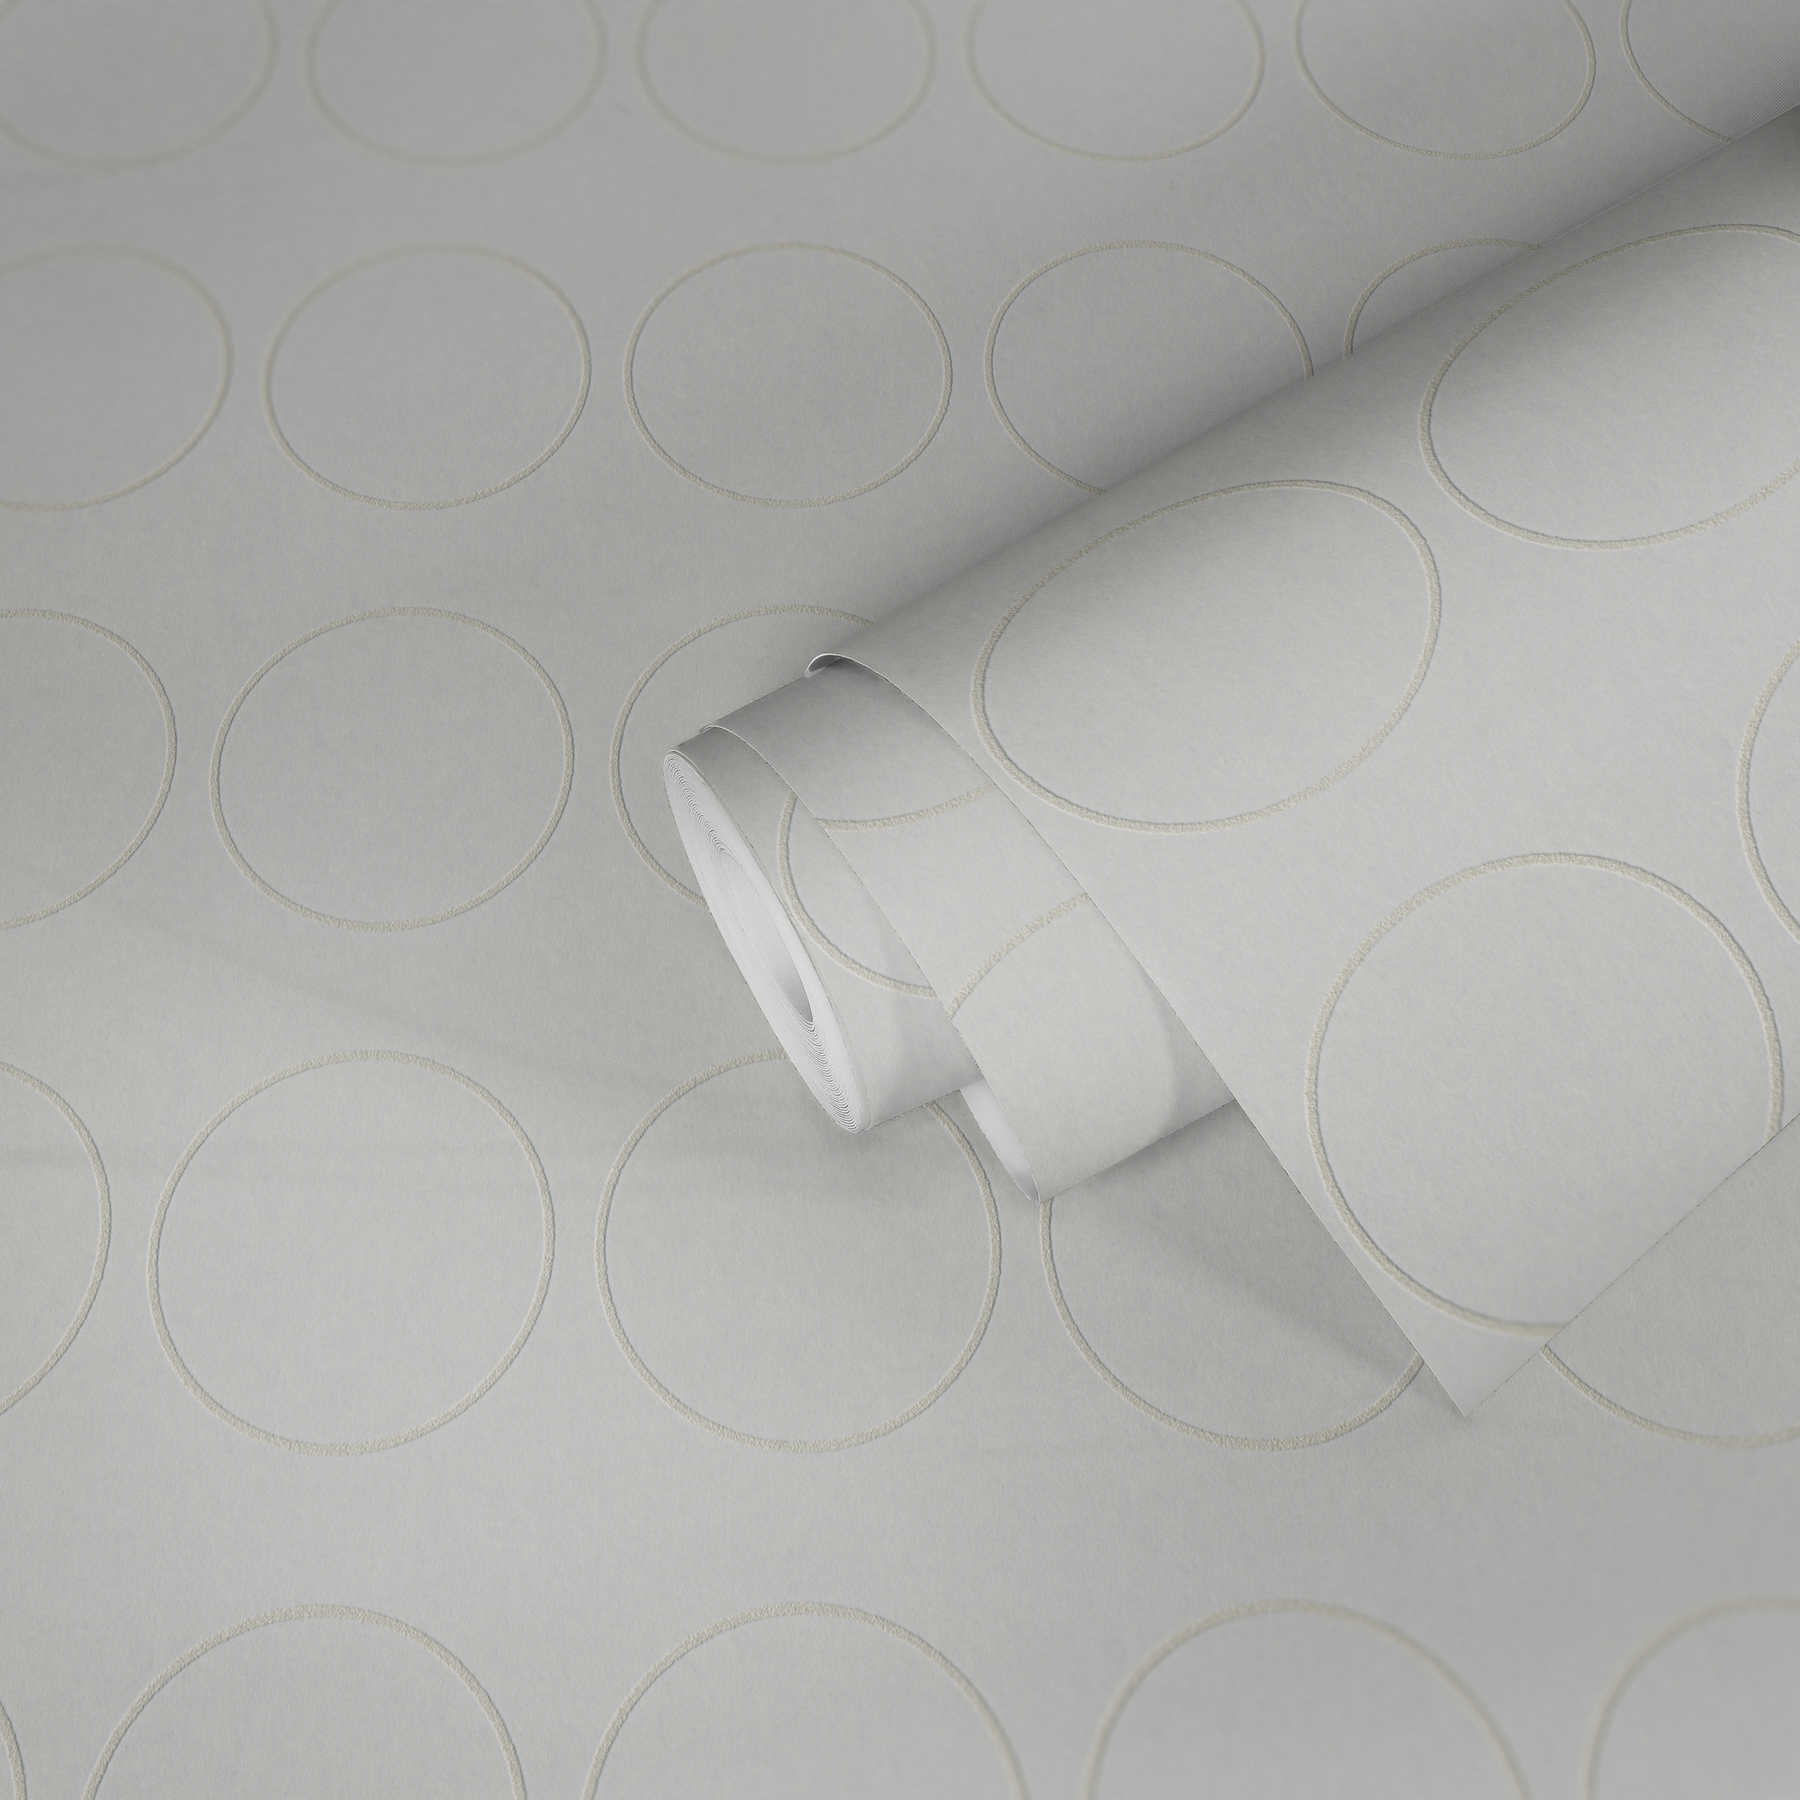             Non-woven wallpaper paintable with 3D circle structure - white
        